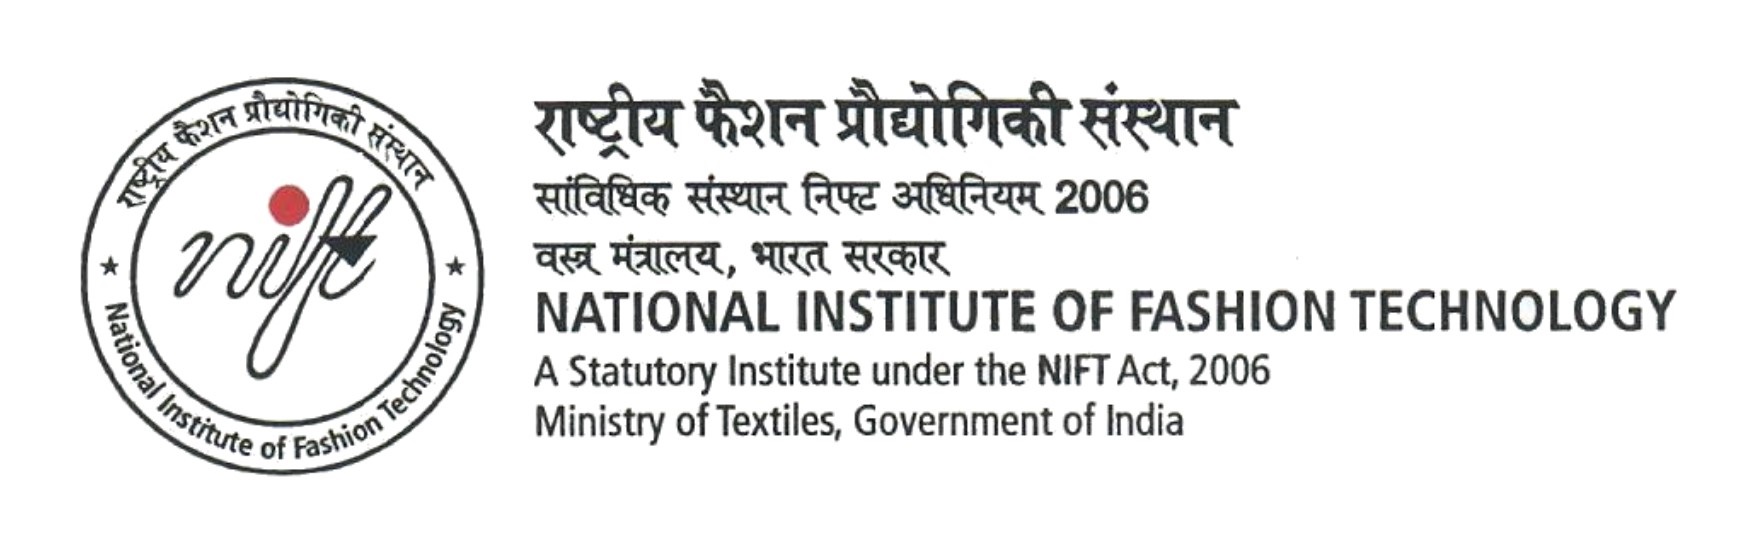 ADMISSIONS - NATIONAL INSTITUTE OF FASHION TECHNOLOGY 